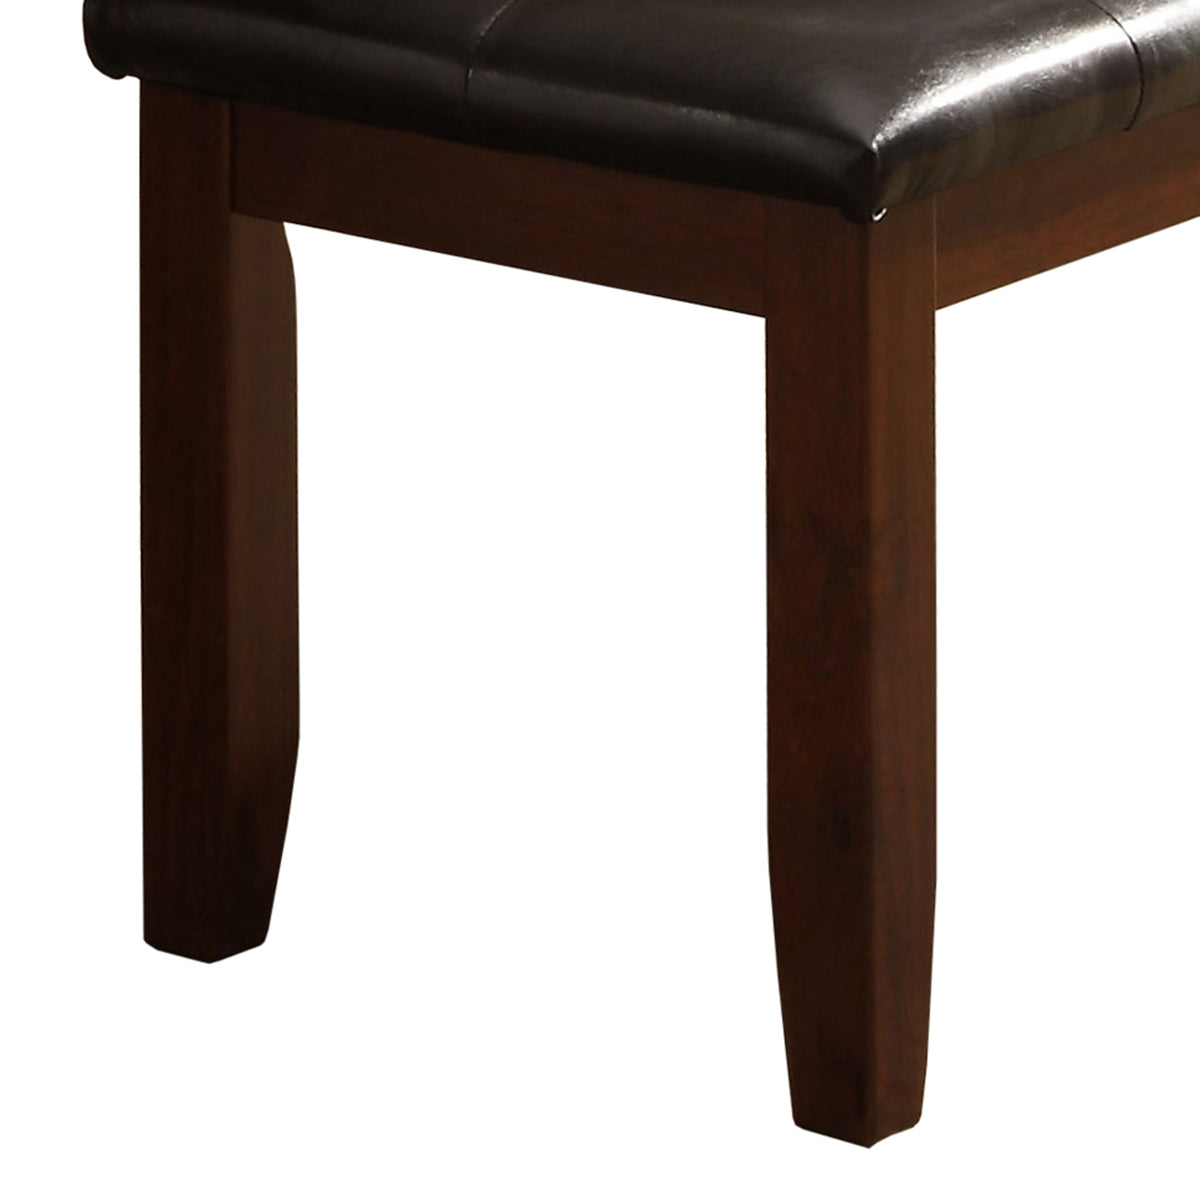 Wood based Leather Tufted Bench In Dark Brown - BM170327